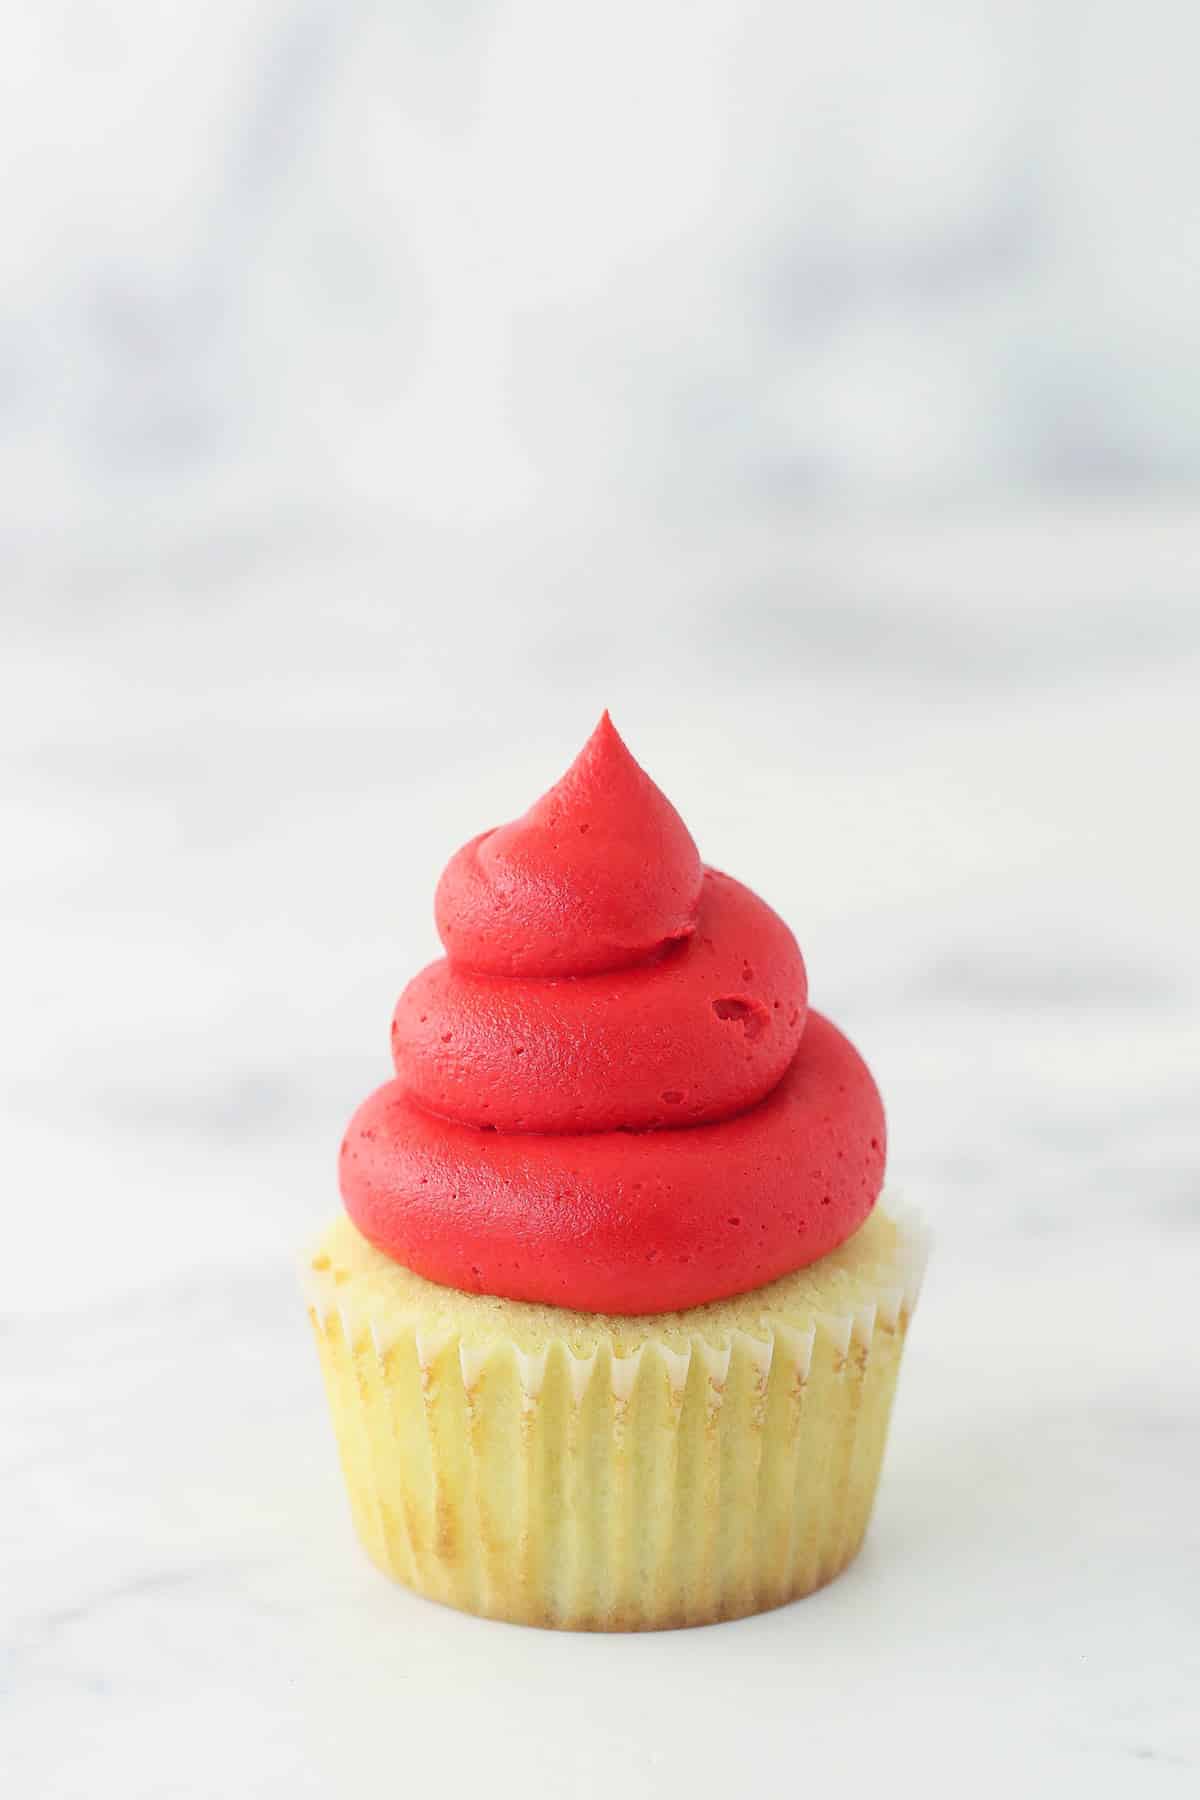 red frosting piped onto cupcake for santa hat